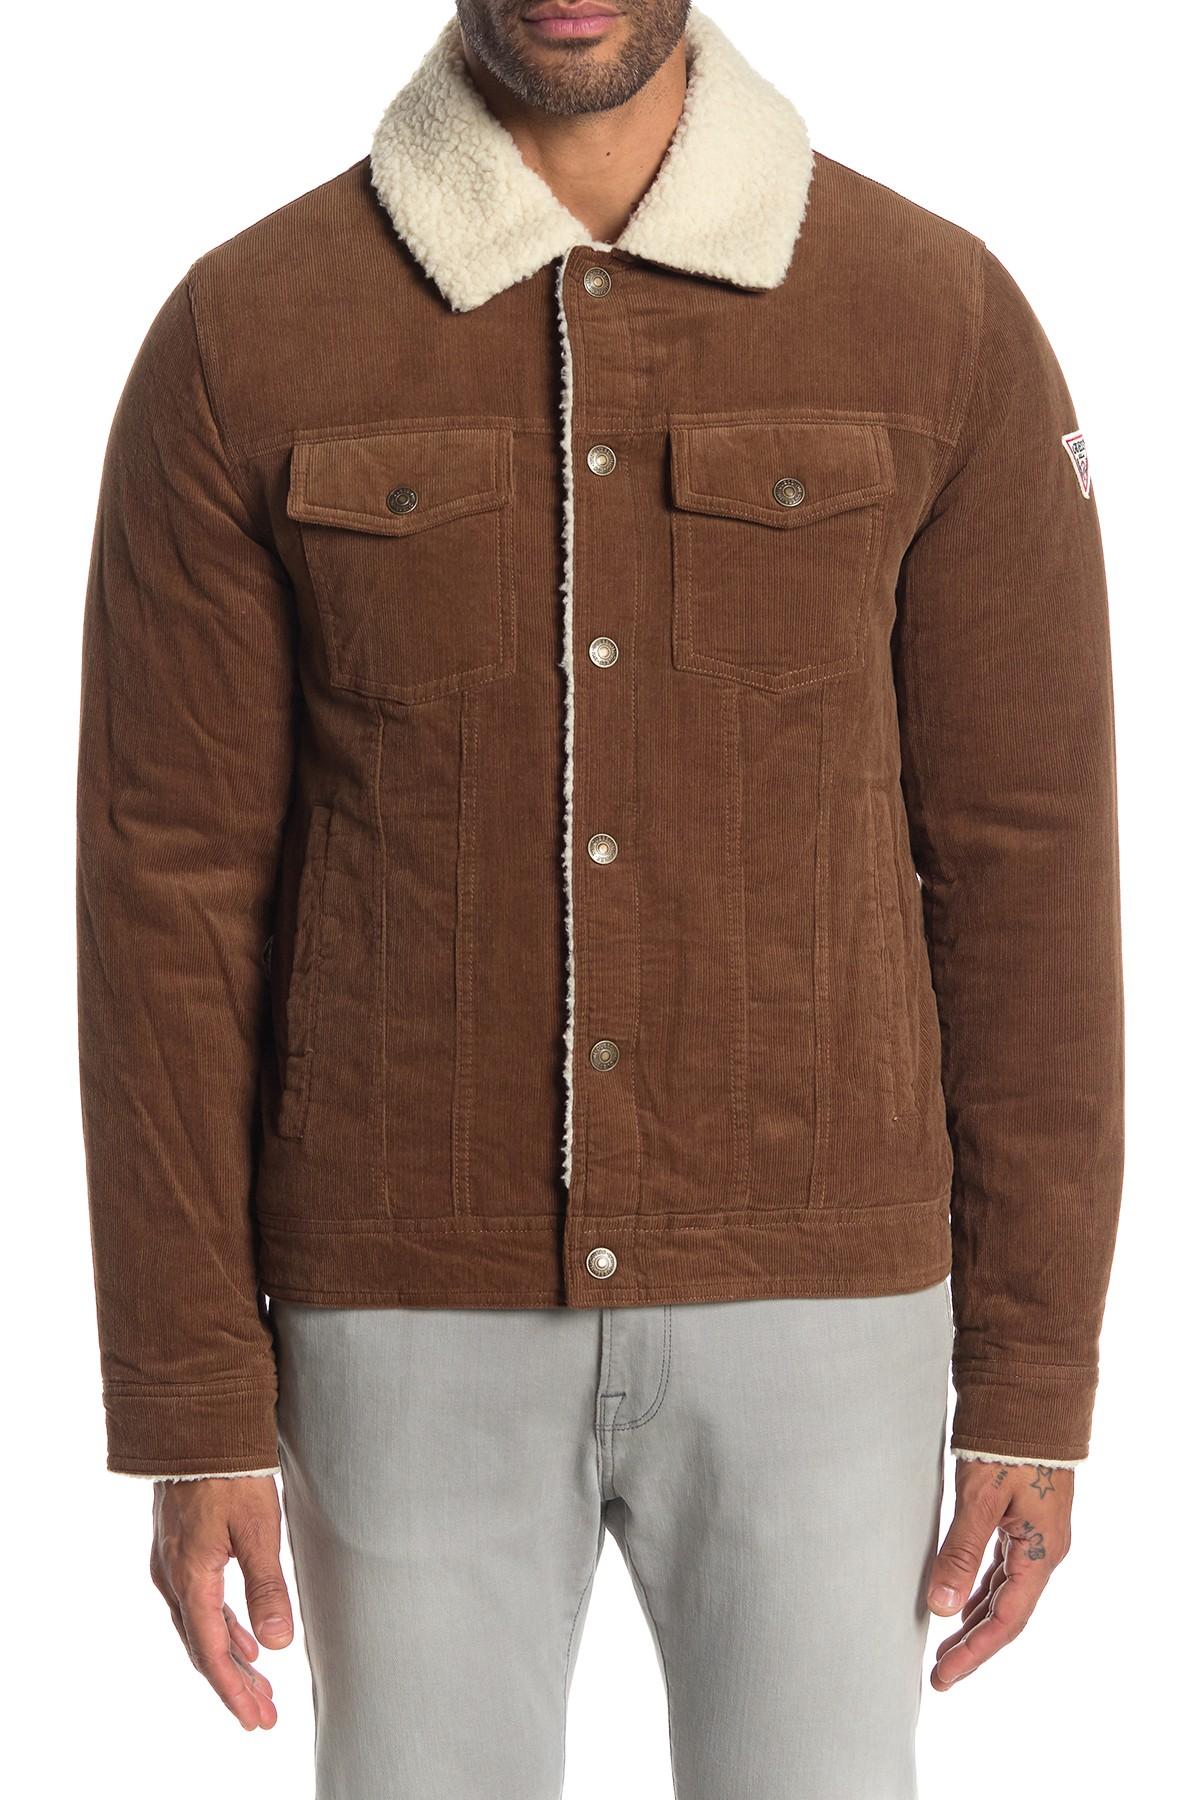 Guess Mens Corduroy Jacket with Sherpa Collar Jacket